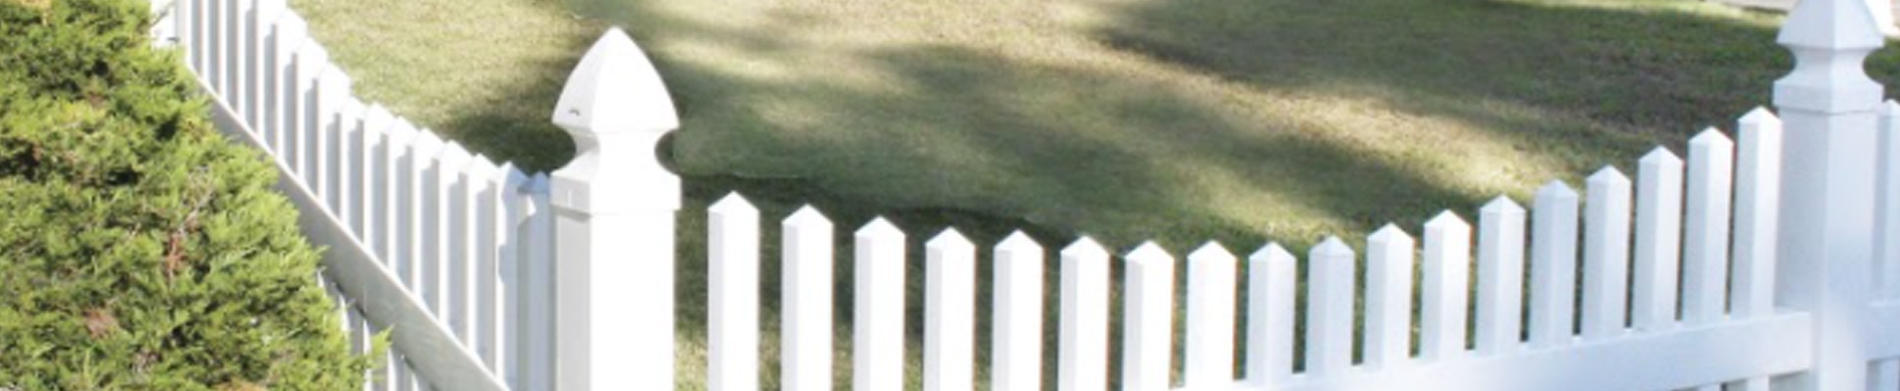 Know Why Traditional Vinyl Fences Are The Best Choice For Your Yard